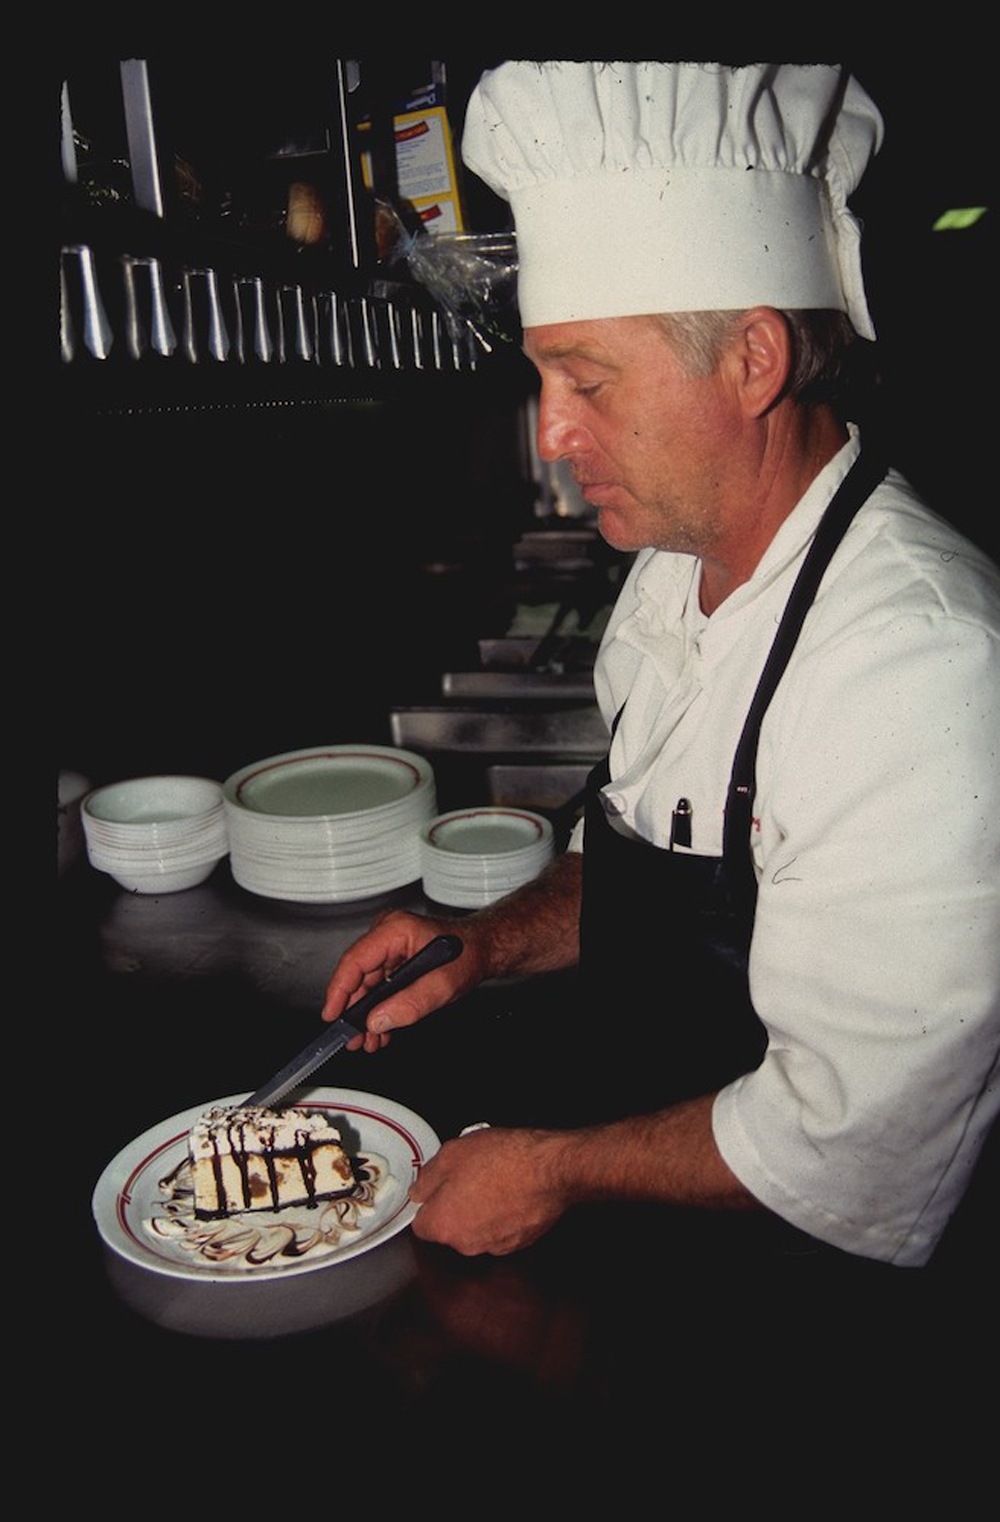 1999 photograph of an Amtrak chef at work in a dining car